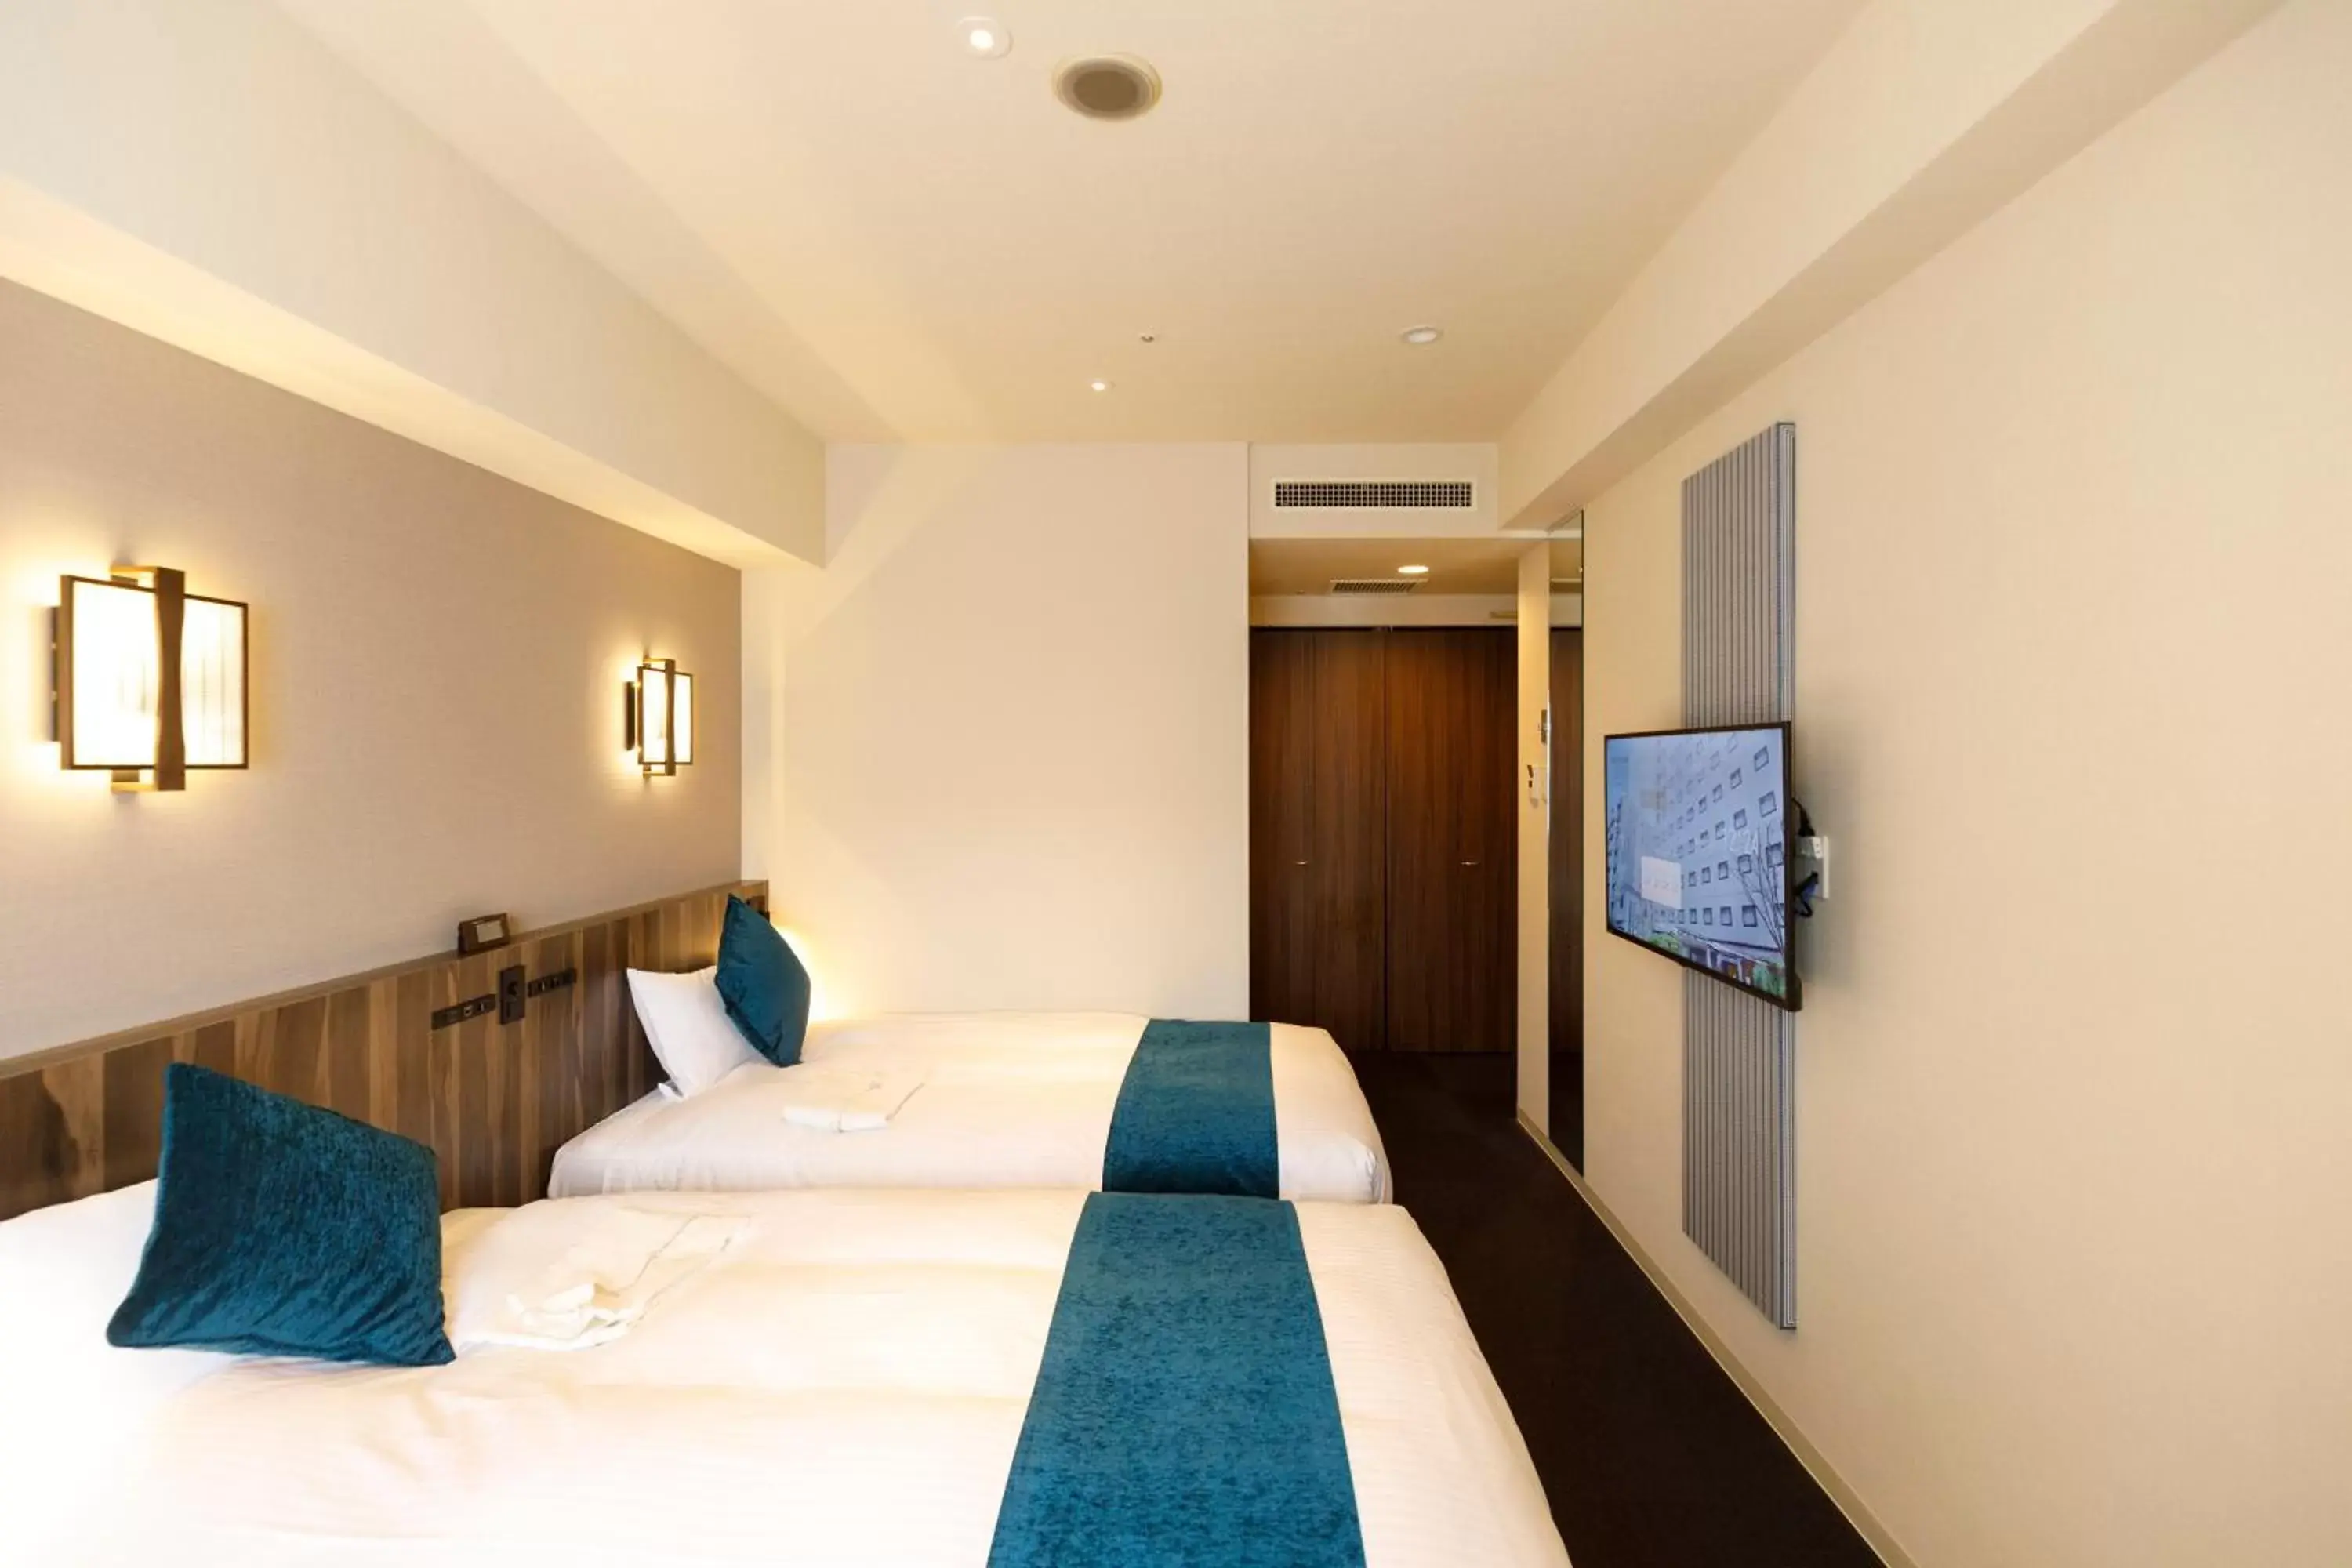 Twin Room - Smoking (E-Cigarettes Only) in President Hotel Hakata